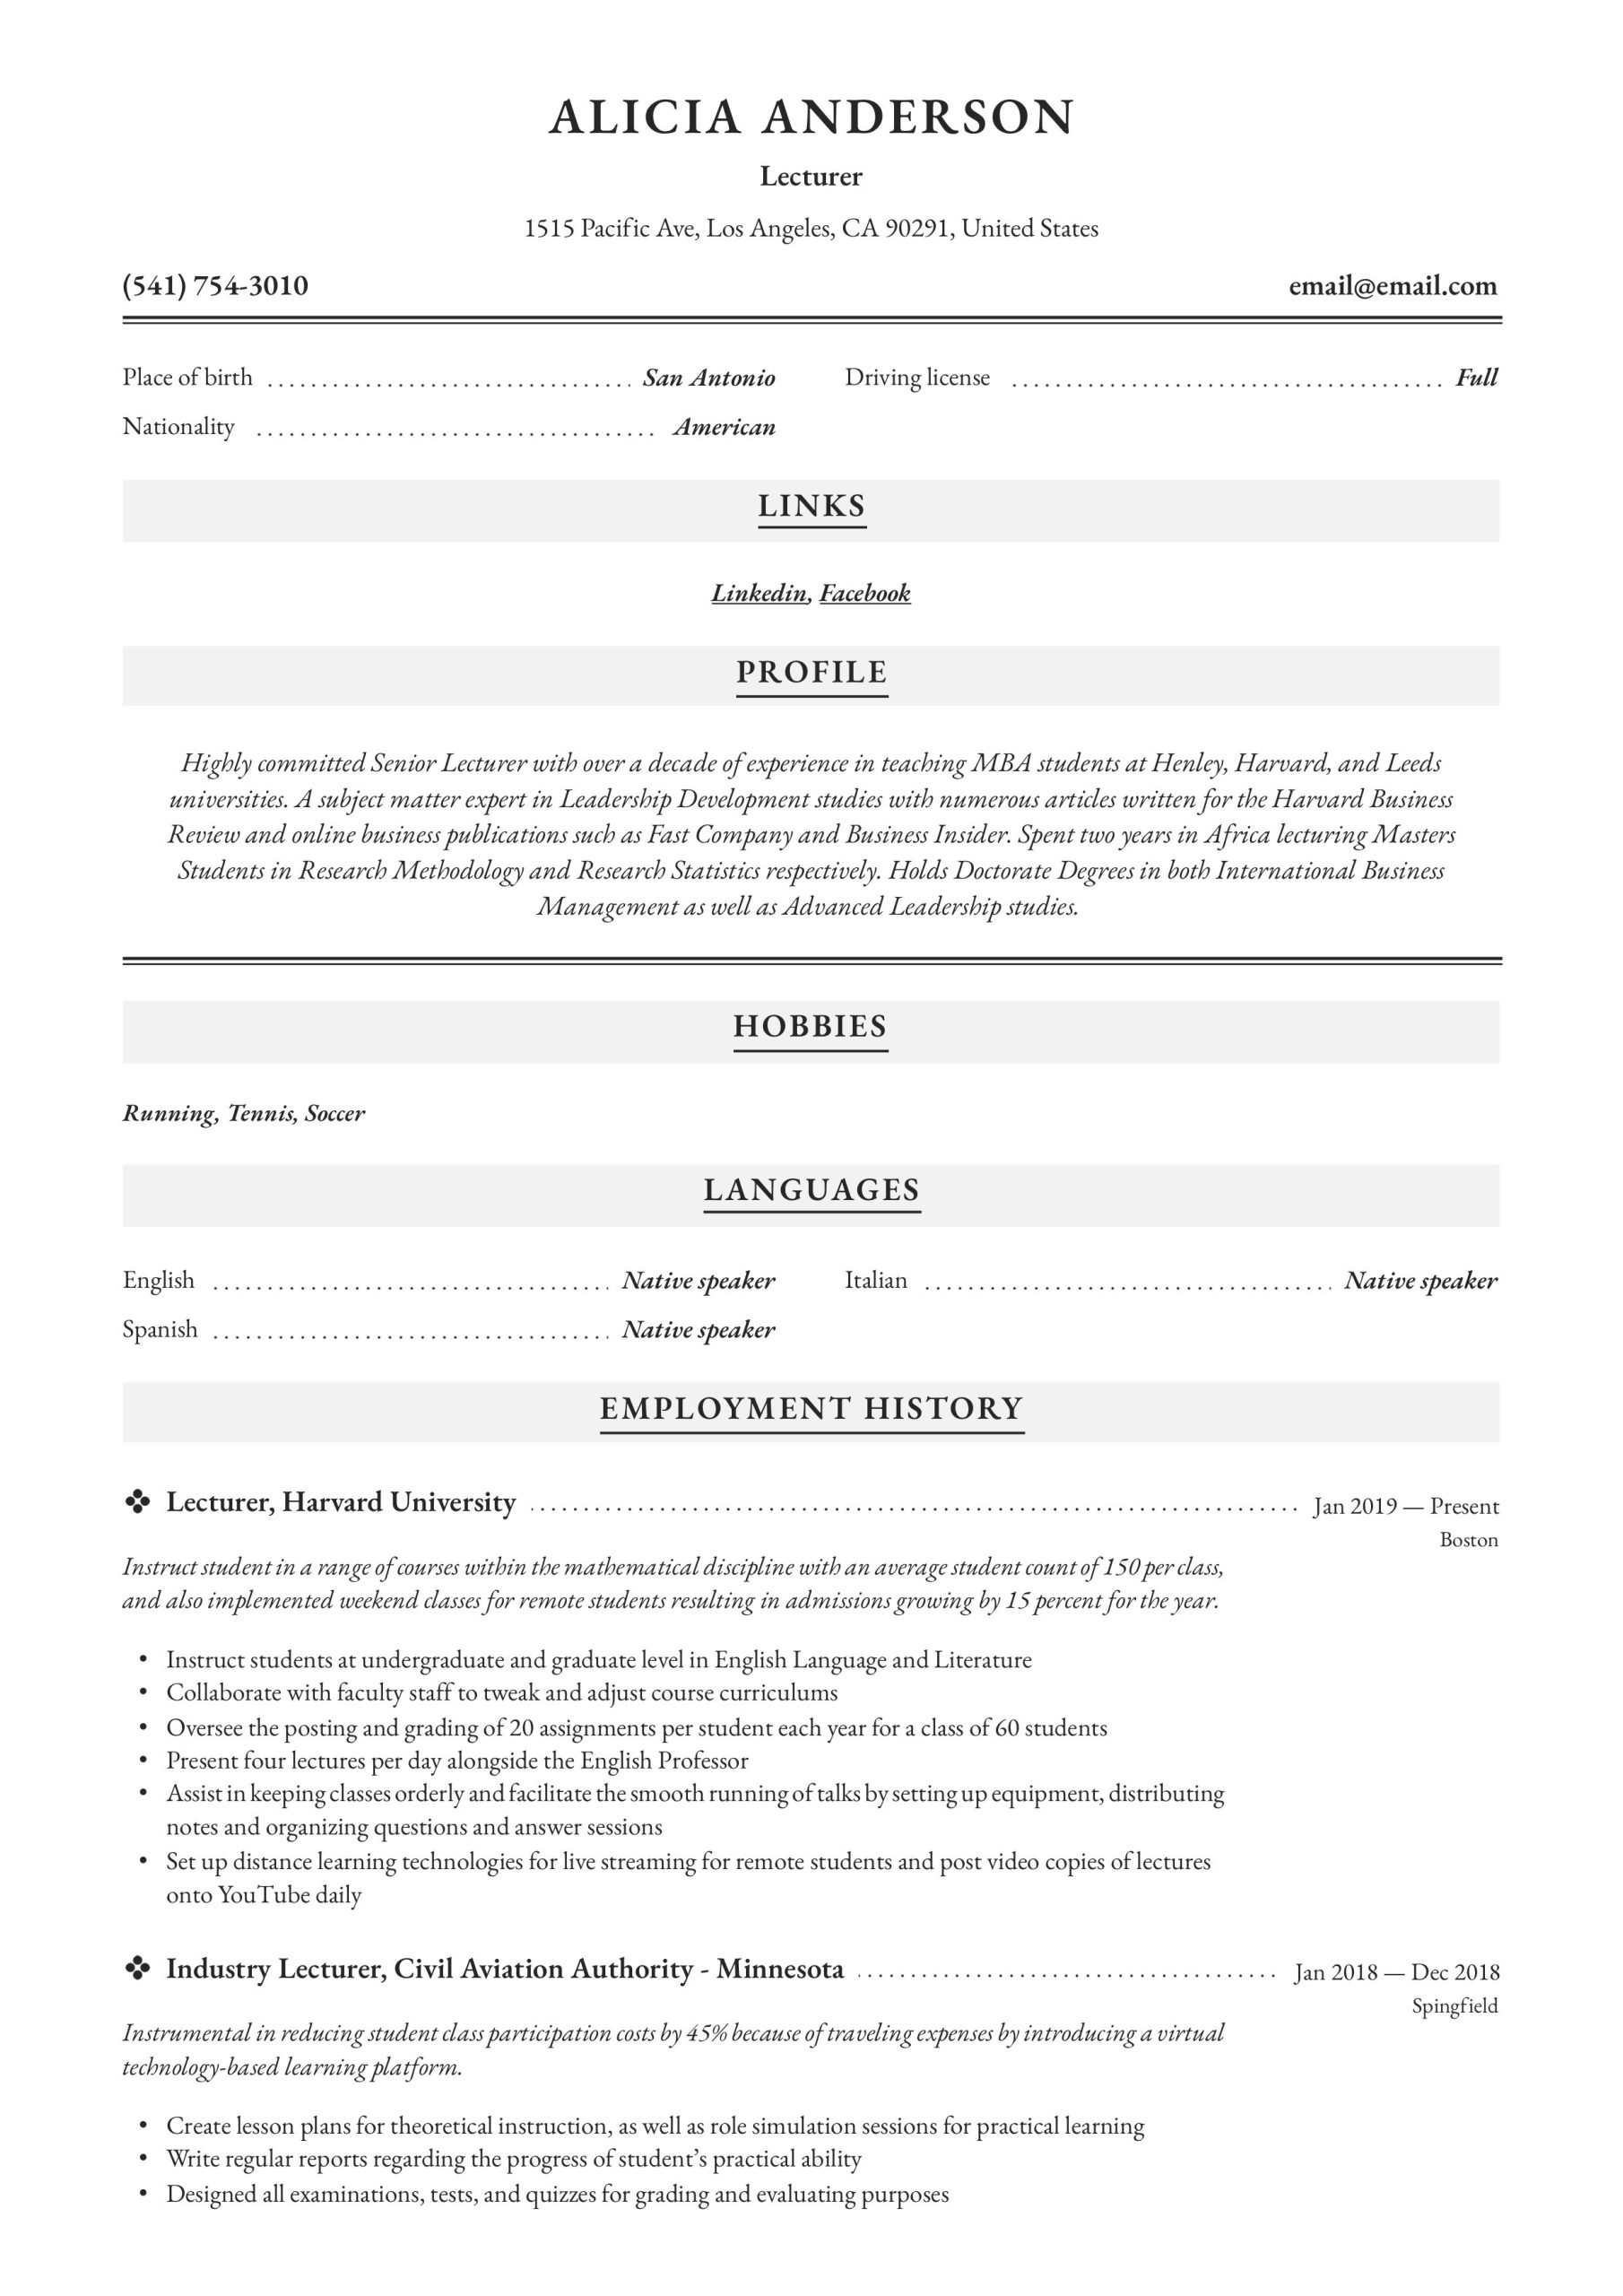 Mba University Professor Resume Canada Samples Lecturer Resume & Writing Guide  18 Free Examples 2020